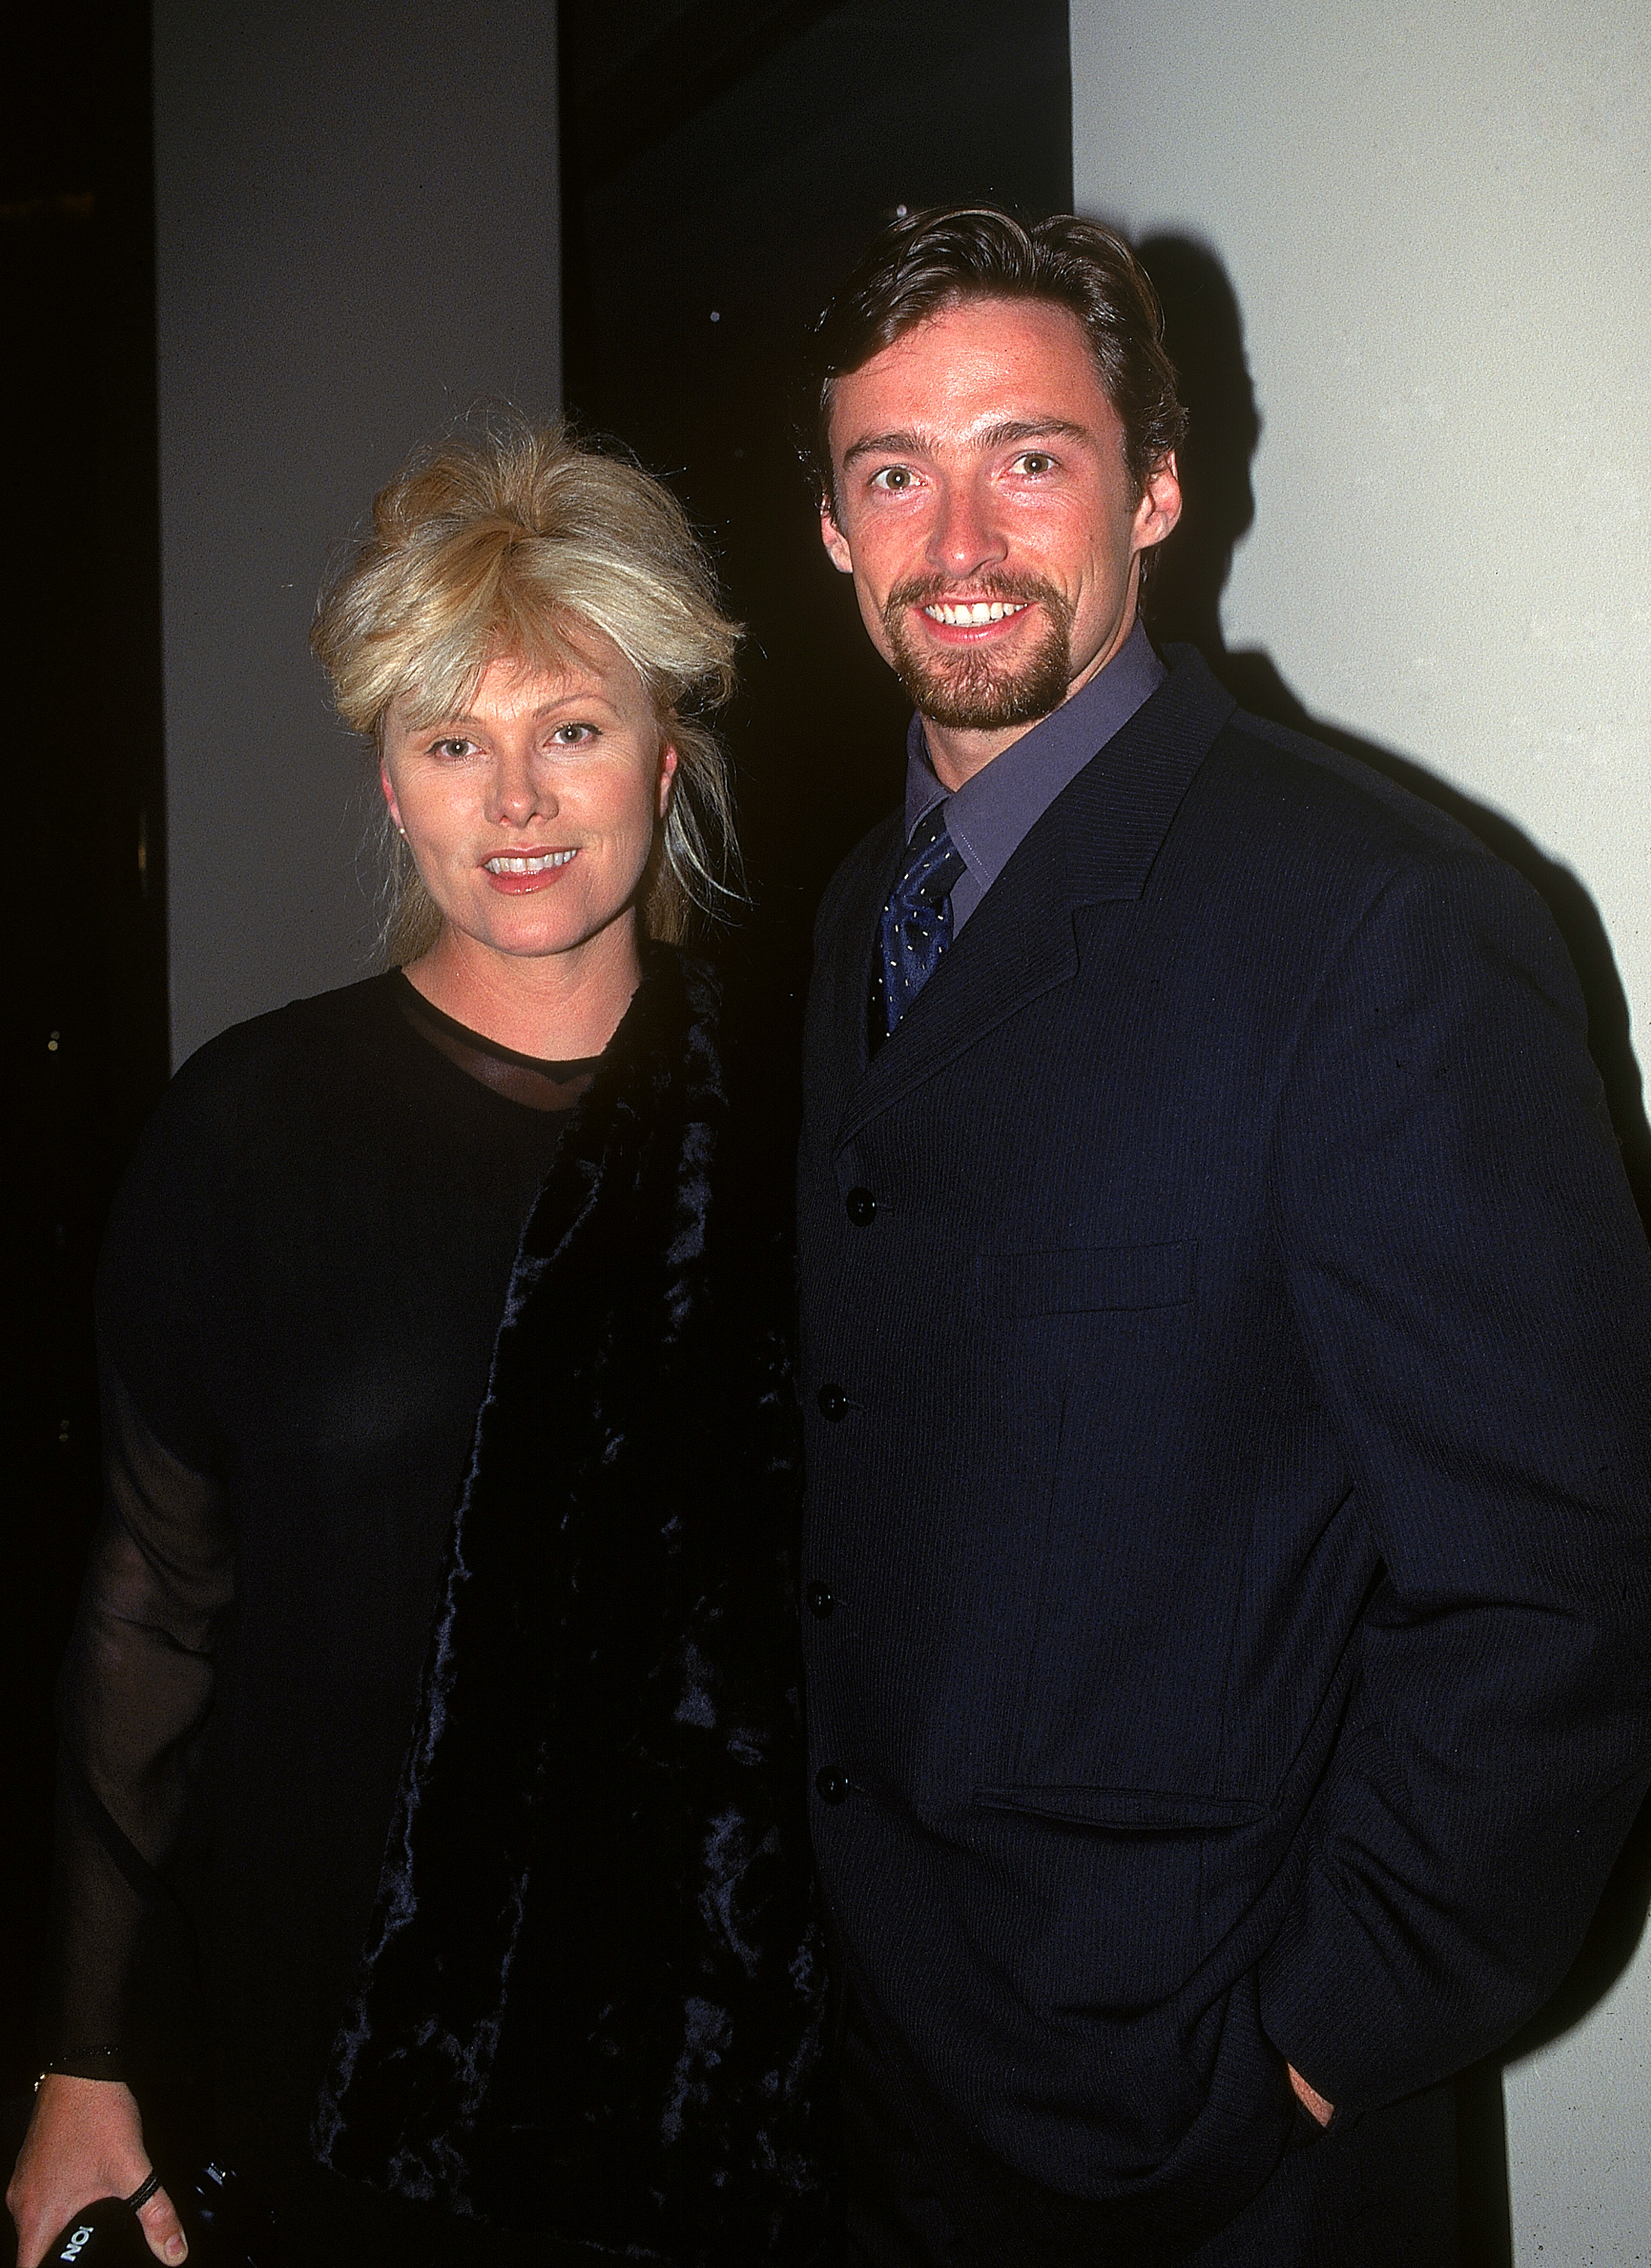 Hugh Jackman and Deborra-Lee Furness at the Variety Club Heart Awards in Sydney, Australia on July 18, 1997 | Source: Getty Images